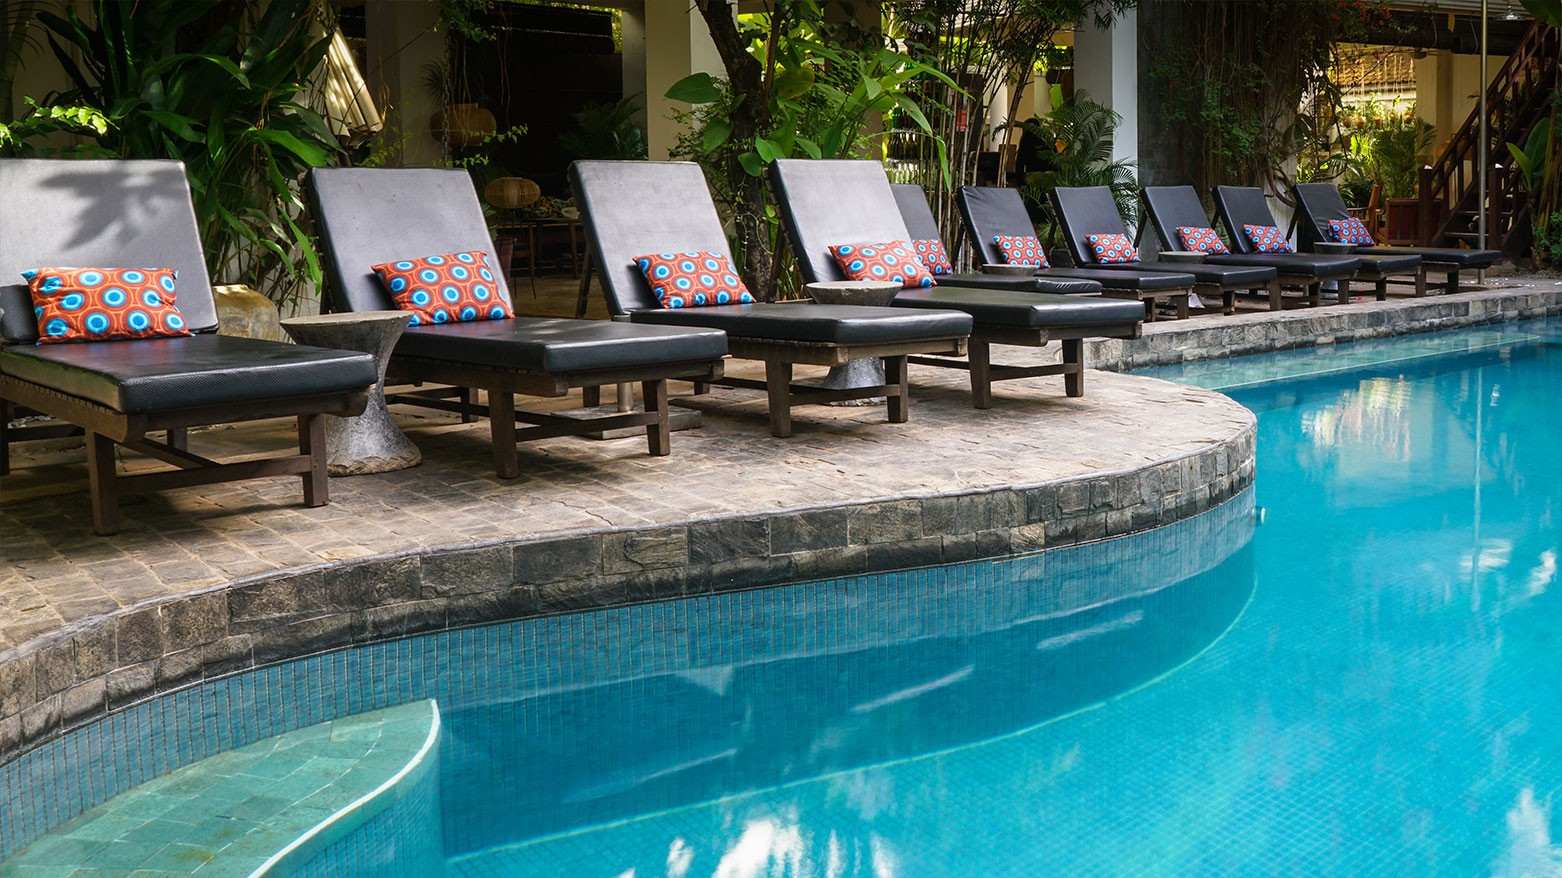 The Rambutan Resort is a luxurious and gay friendly place to stay in Phnom Penh